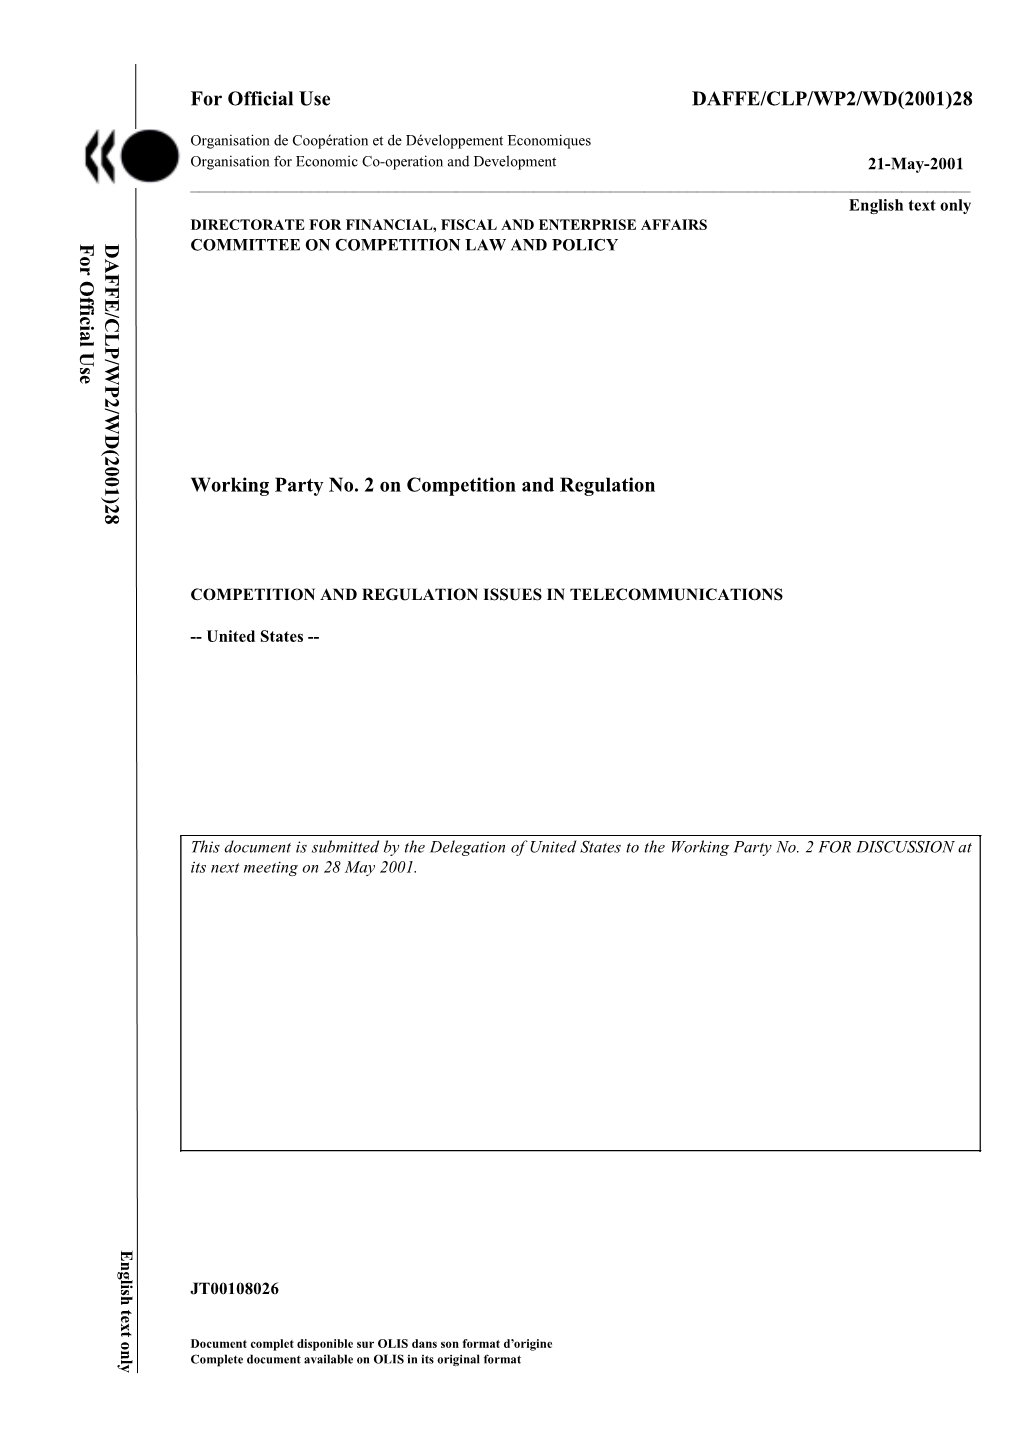 28 Working Party No. 2 on Competition and Regulation DAFFE